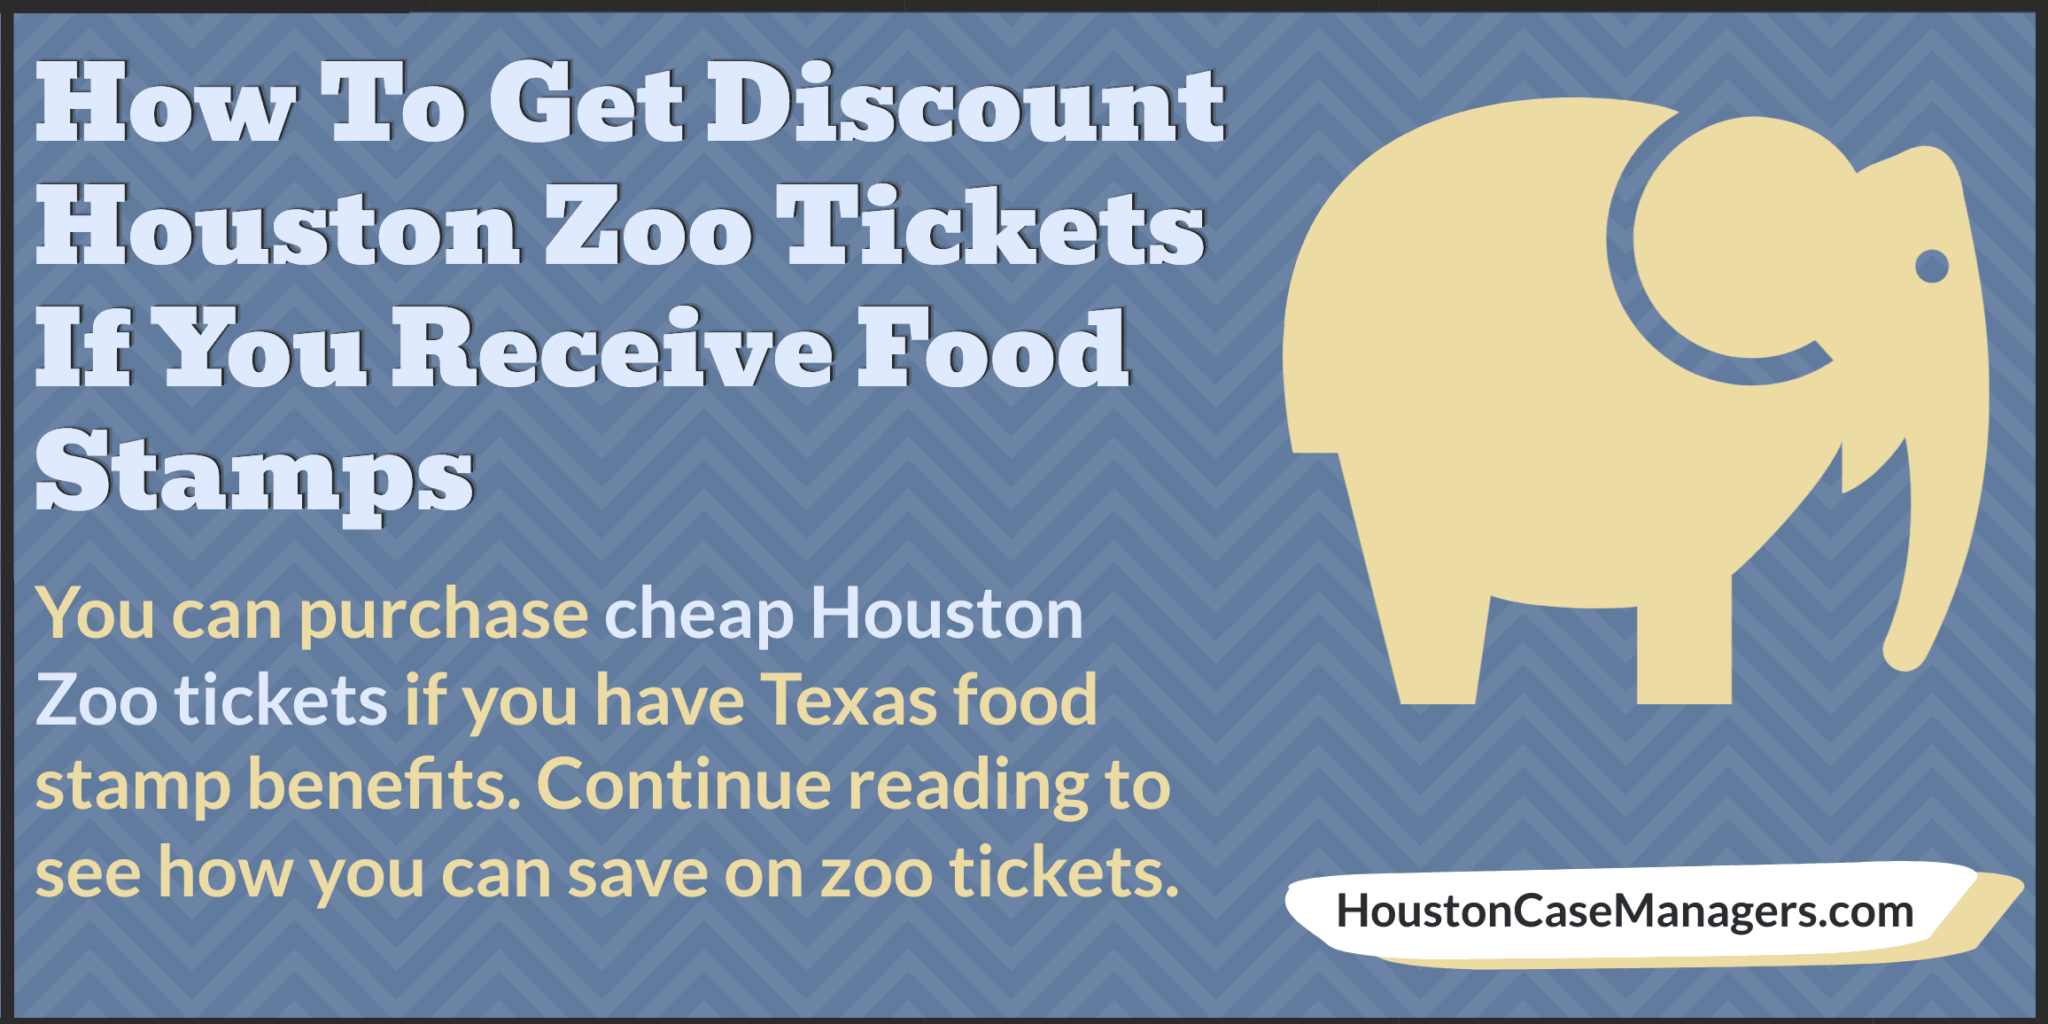 Get Houston Zoo Tickets With Food Stamps And Save Money